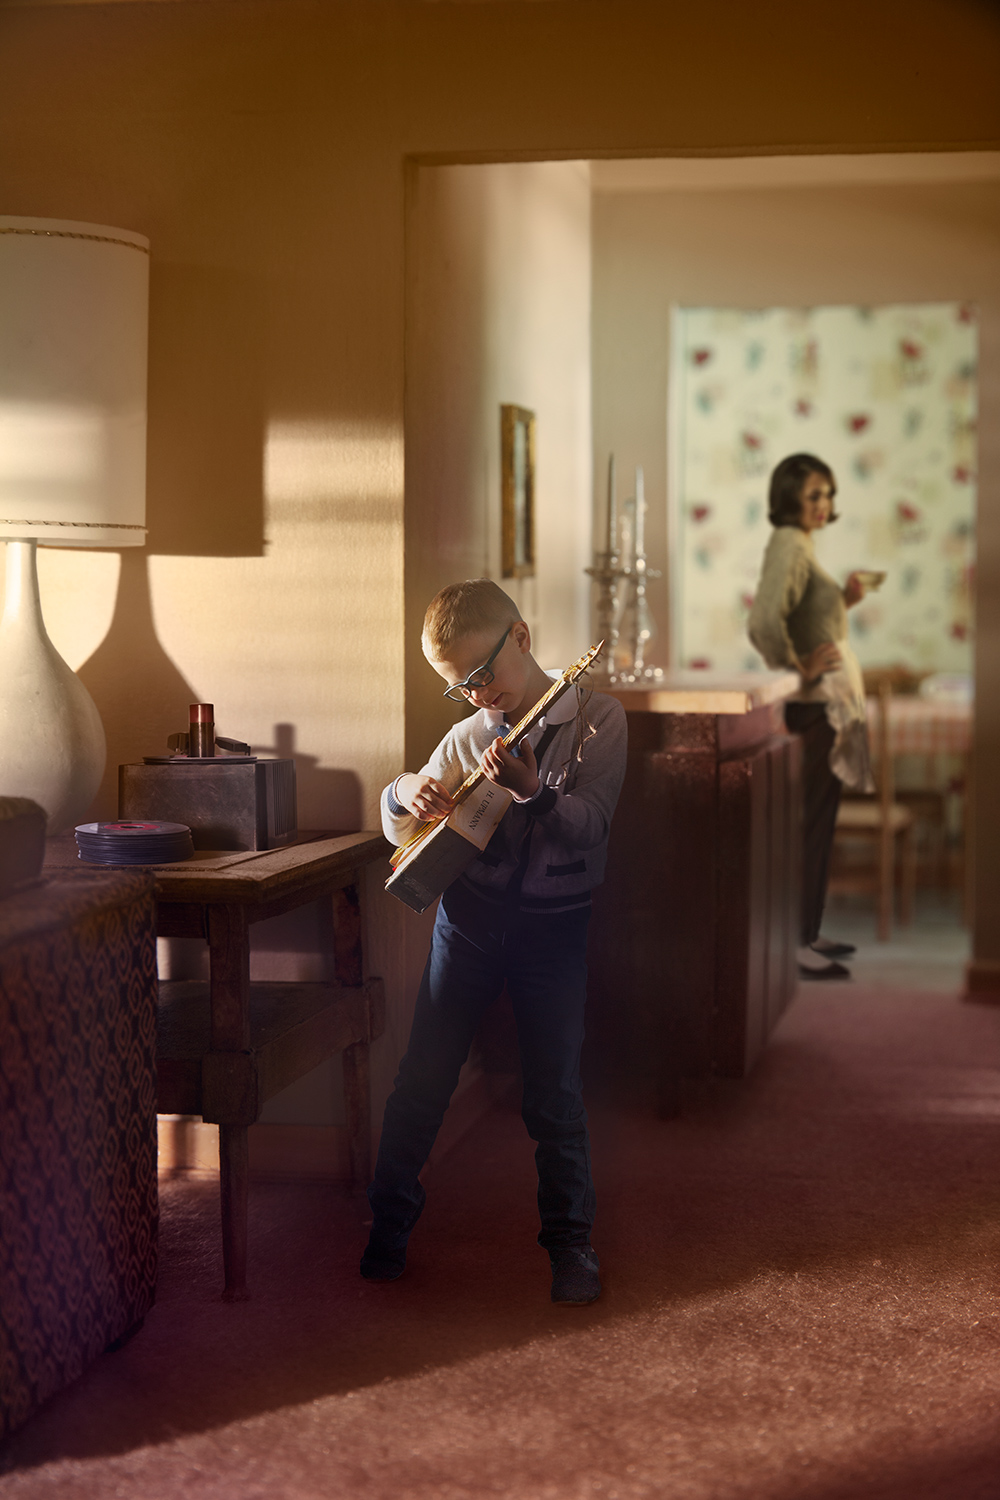 Boy enthusiastically playing toy guitar in 1960s sunlit suburban living room miniature dollhouse set